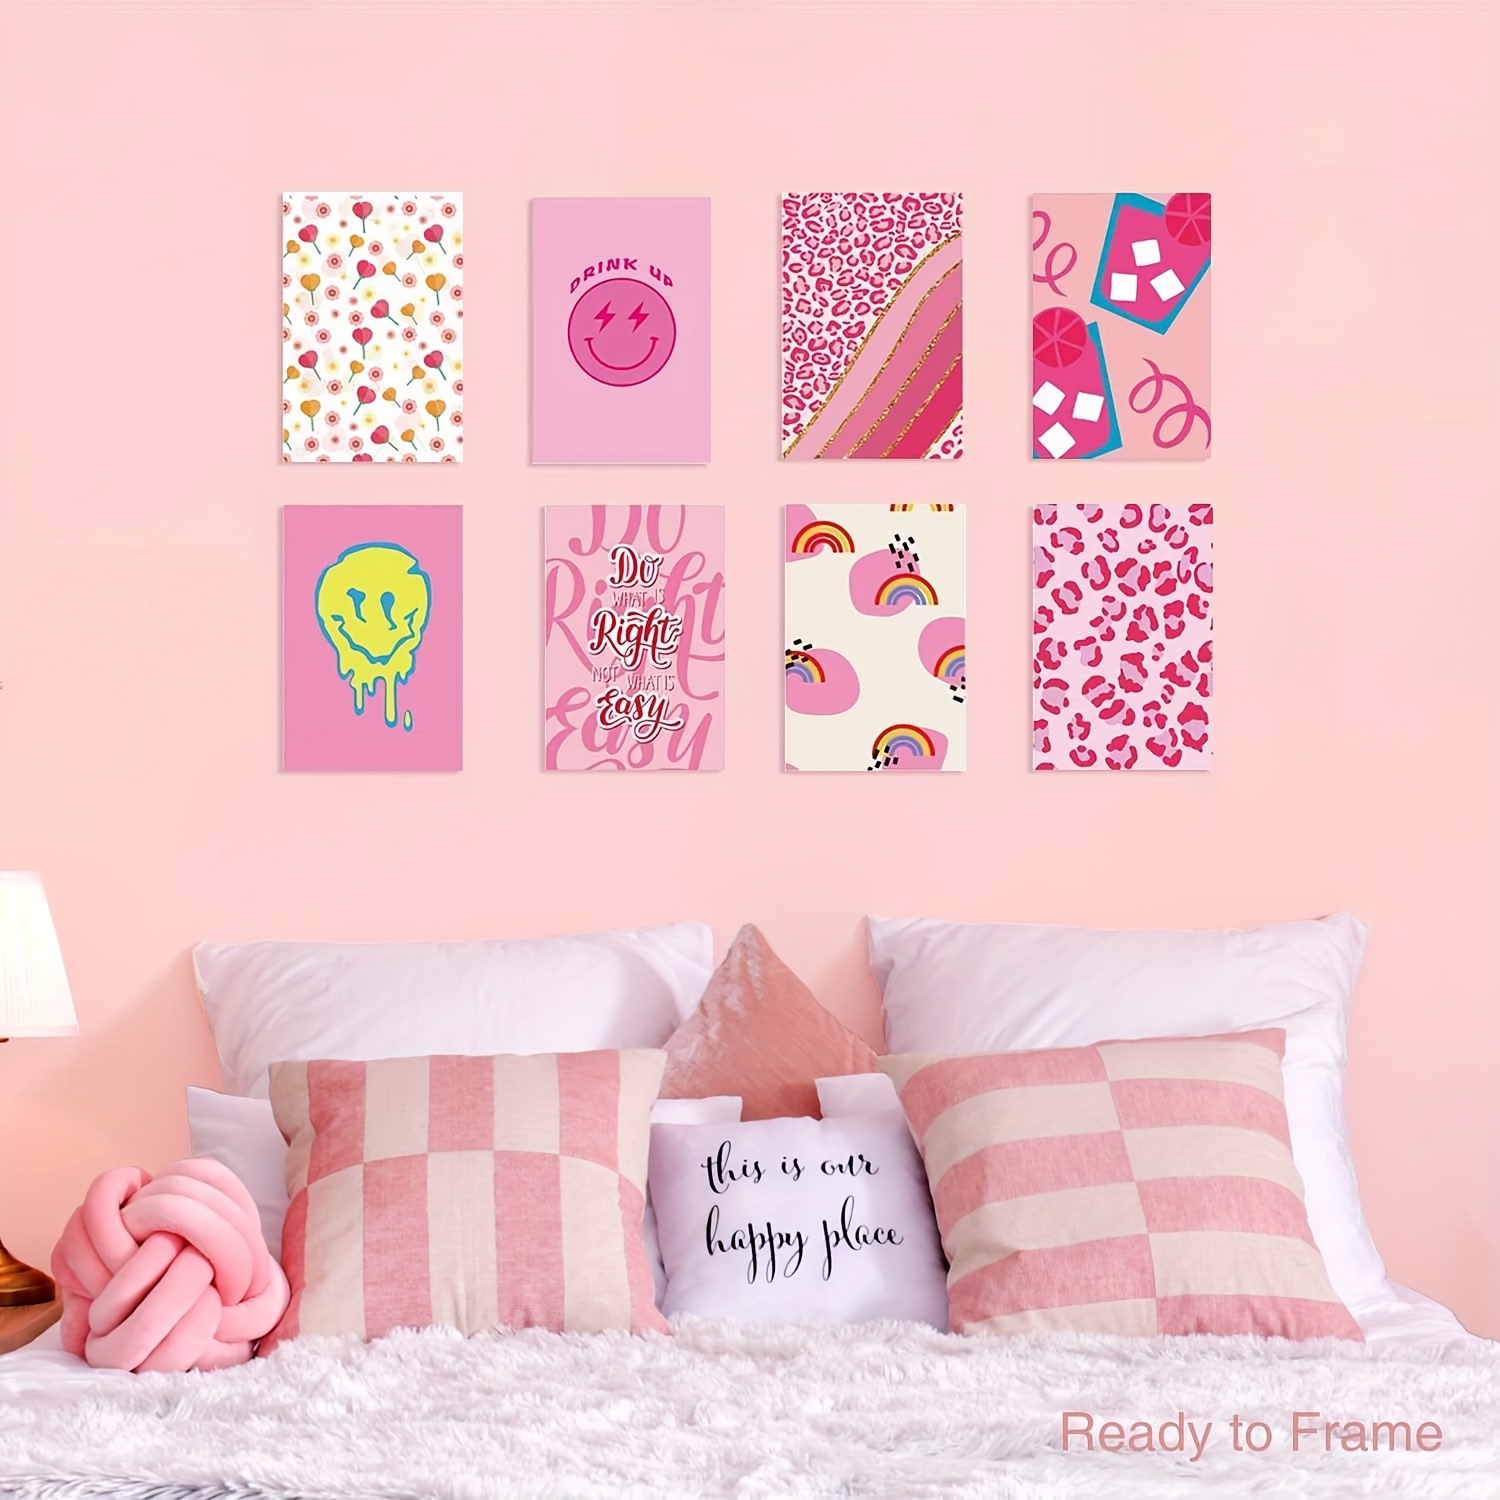 Funky Pink Preppy Aesthetic Wall Collage Kit, Preppy Room Decor